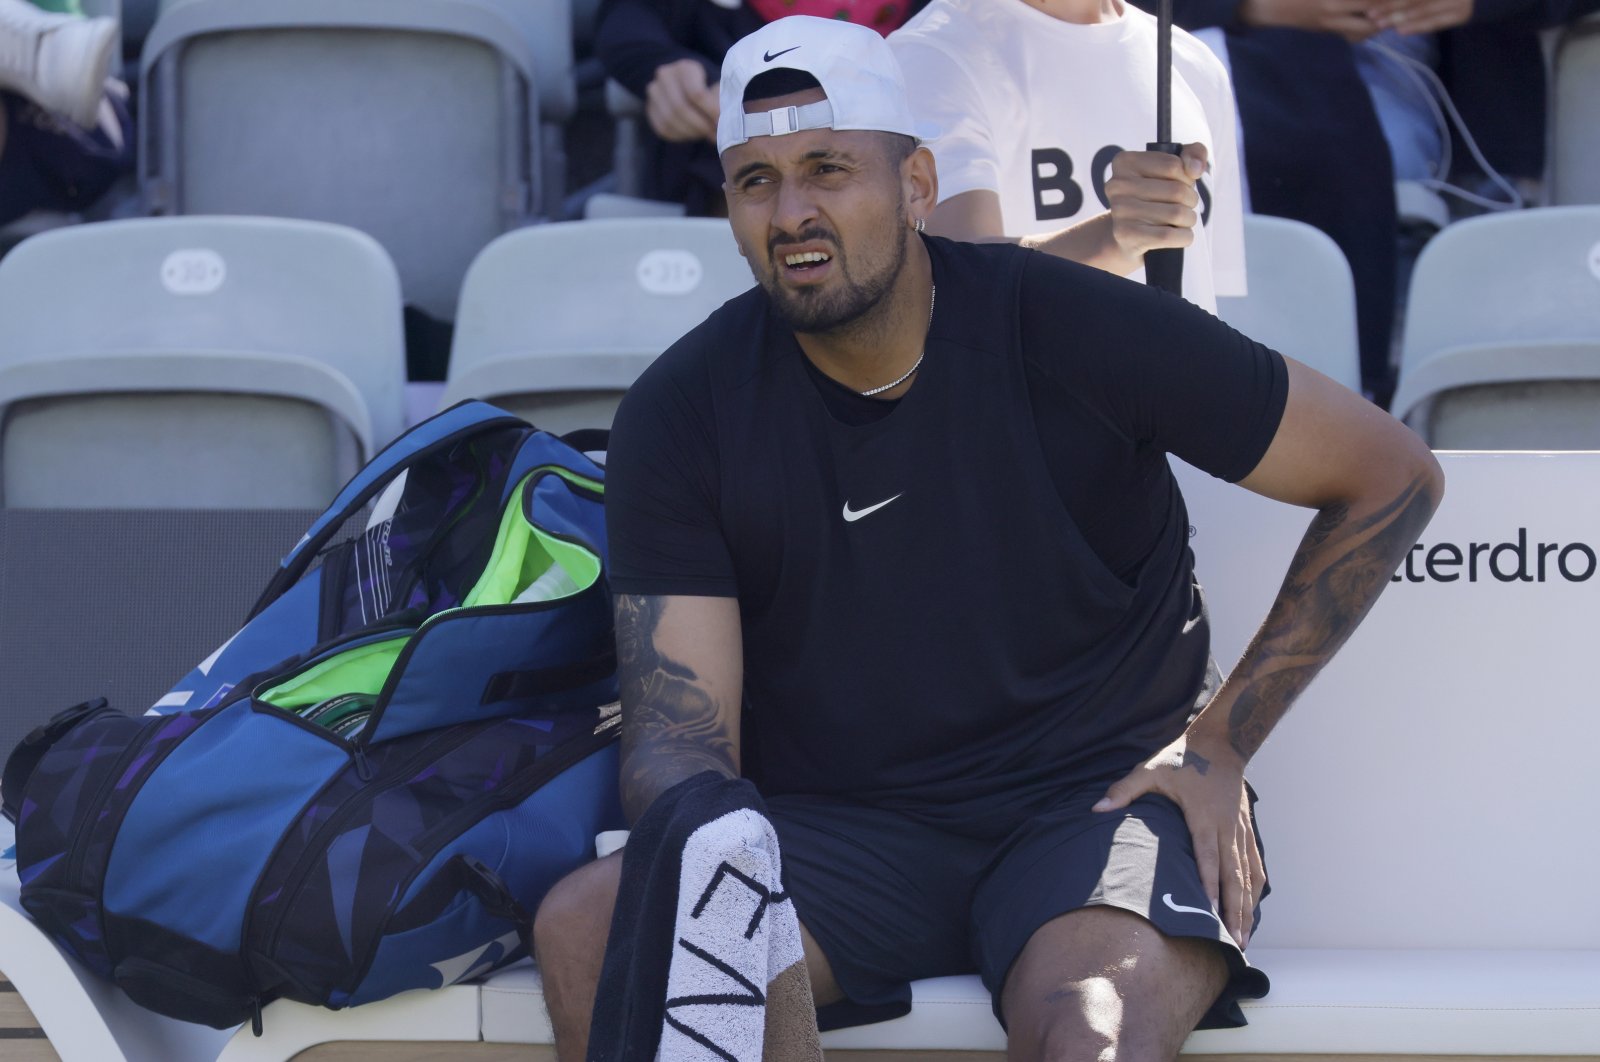 Nick Kyrgios of Australia reacts during his first round match against Yibing Wu of China at the ATP Boss Open tennis tournament, Stuttgart, Germany, June 13, 2023. (EPA Photo)